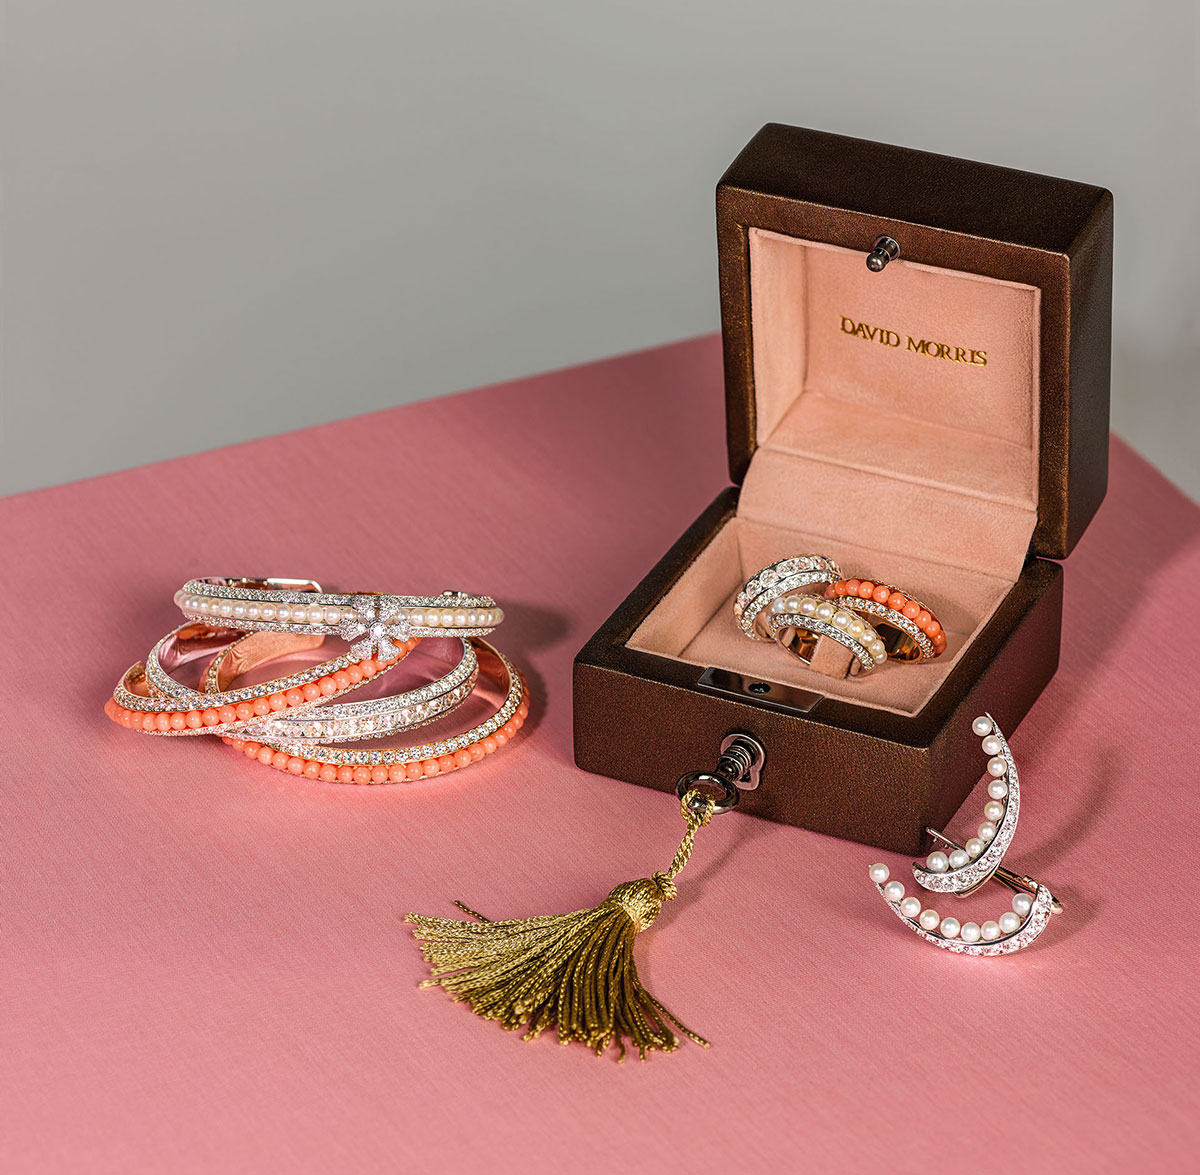 The new Pearl Rose collection by David Morris